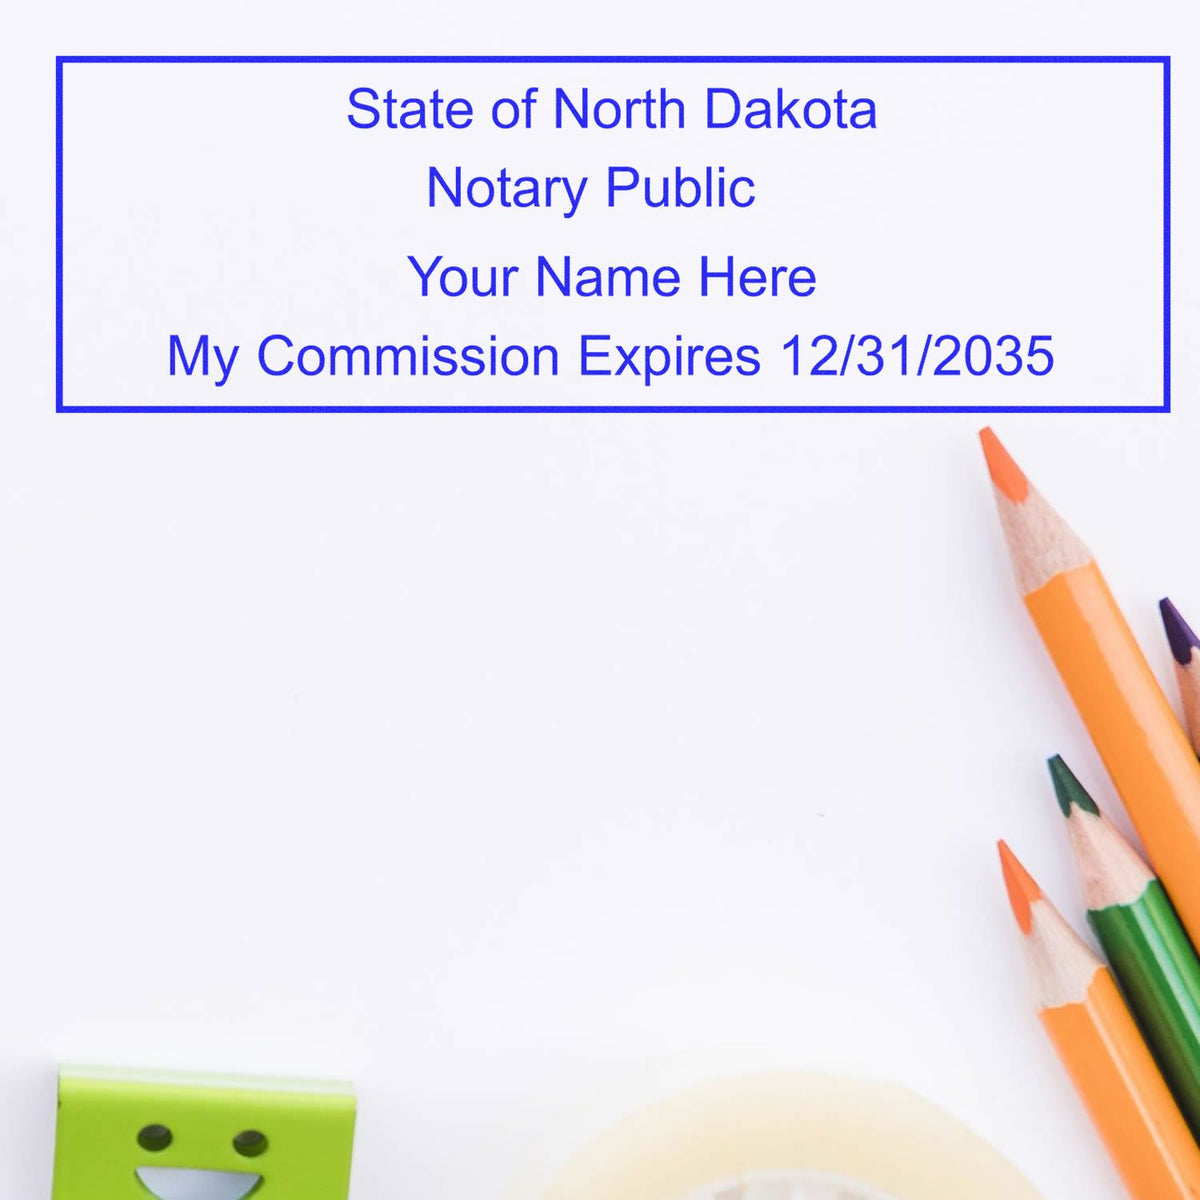 This paper is stamped with a sample imprint of the Slim Pre-Inked Rectangular Notary Stamp for North Dakota, signifying its quality and reliability.